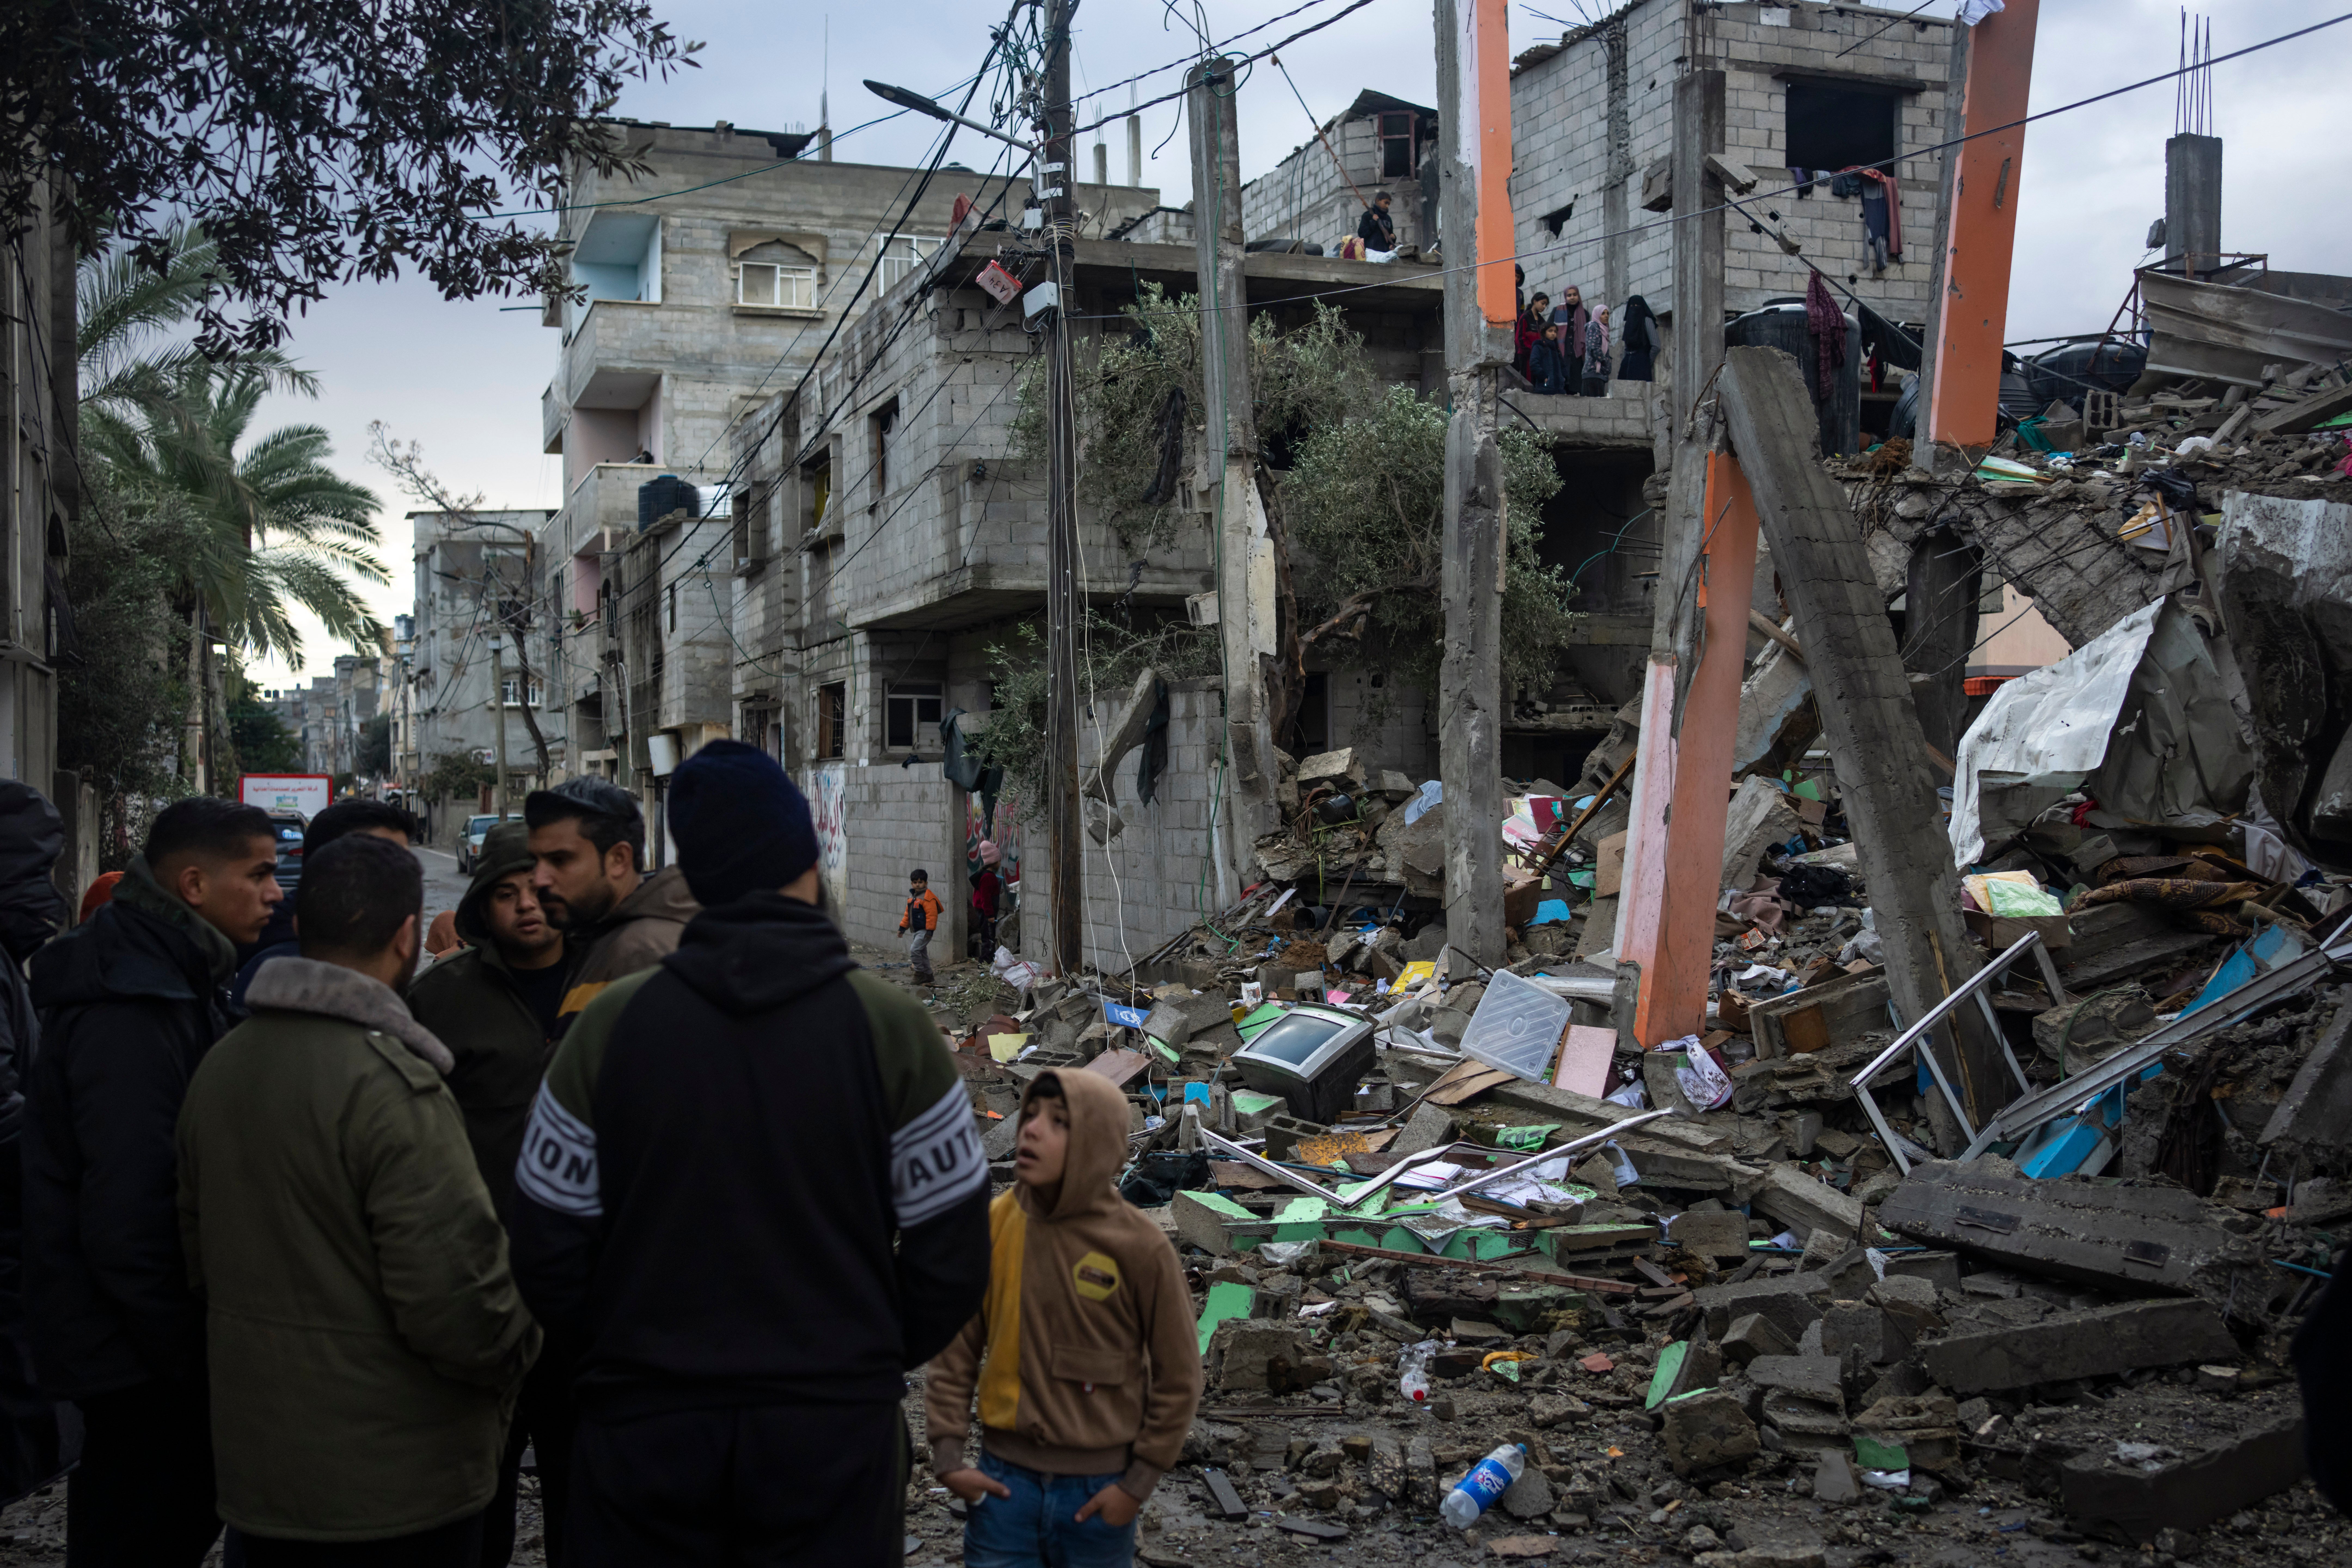 Israeli forces have repeatedly bombed Gaza, causing hundreds of thousands to flee